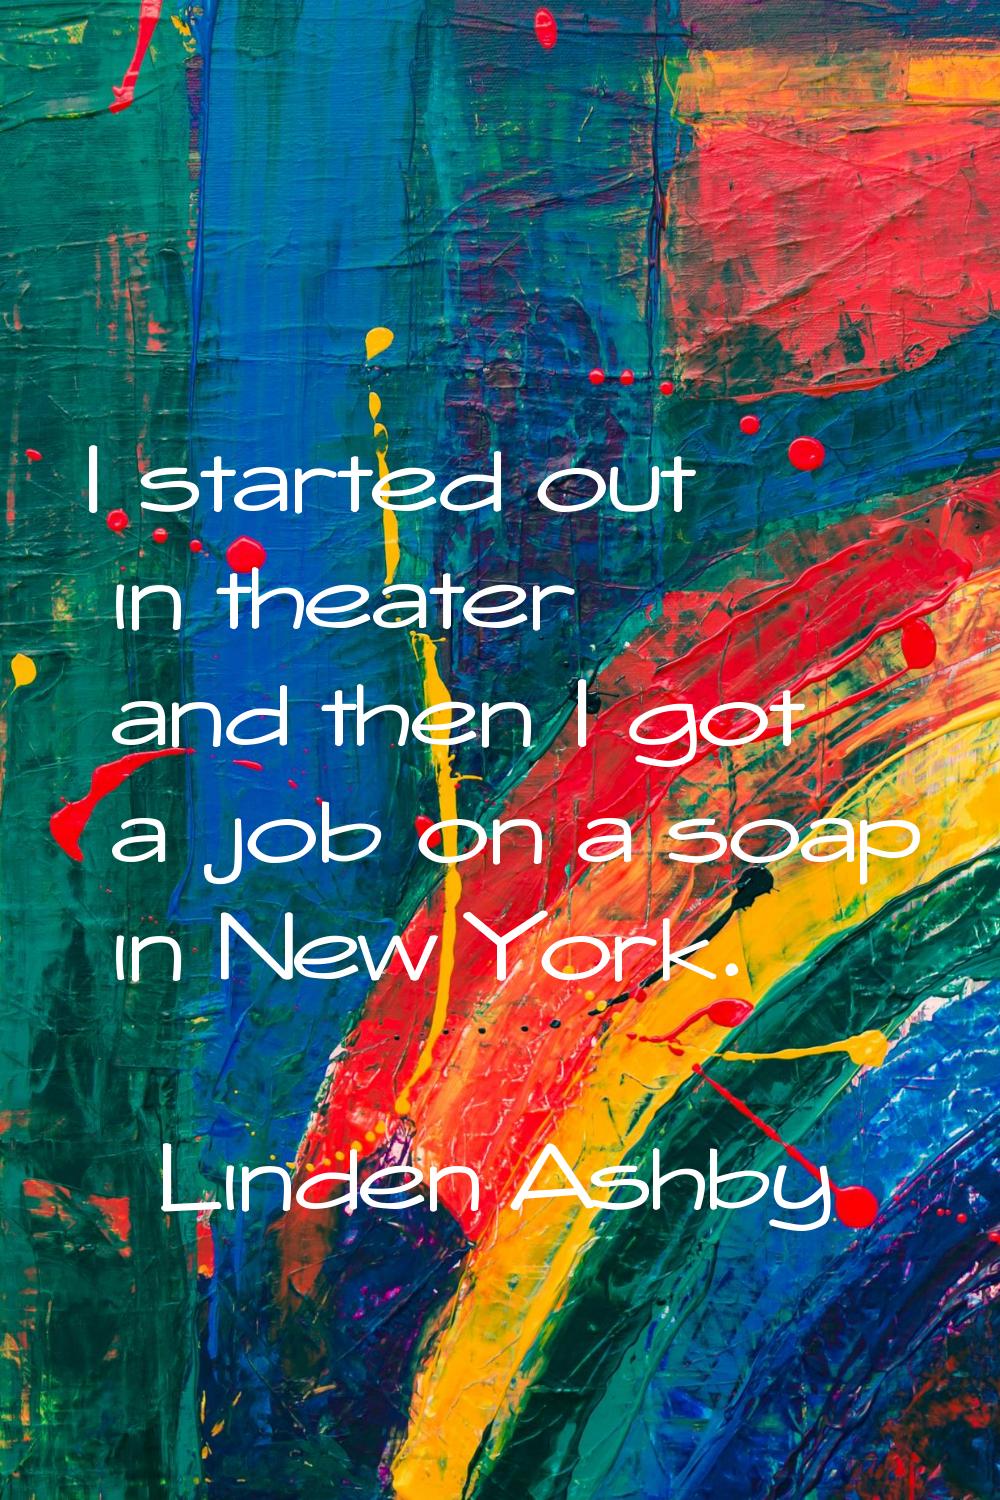 I started out in theater and then I got a job on a soap in New York.